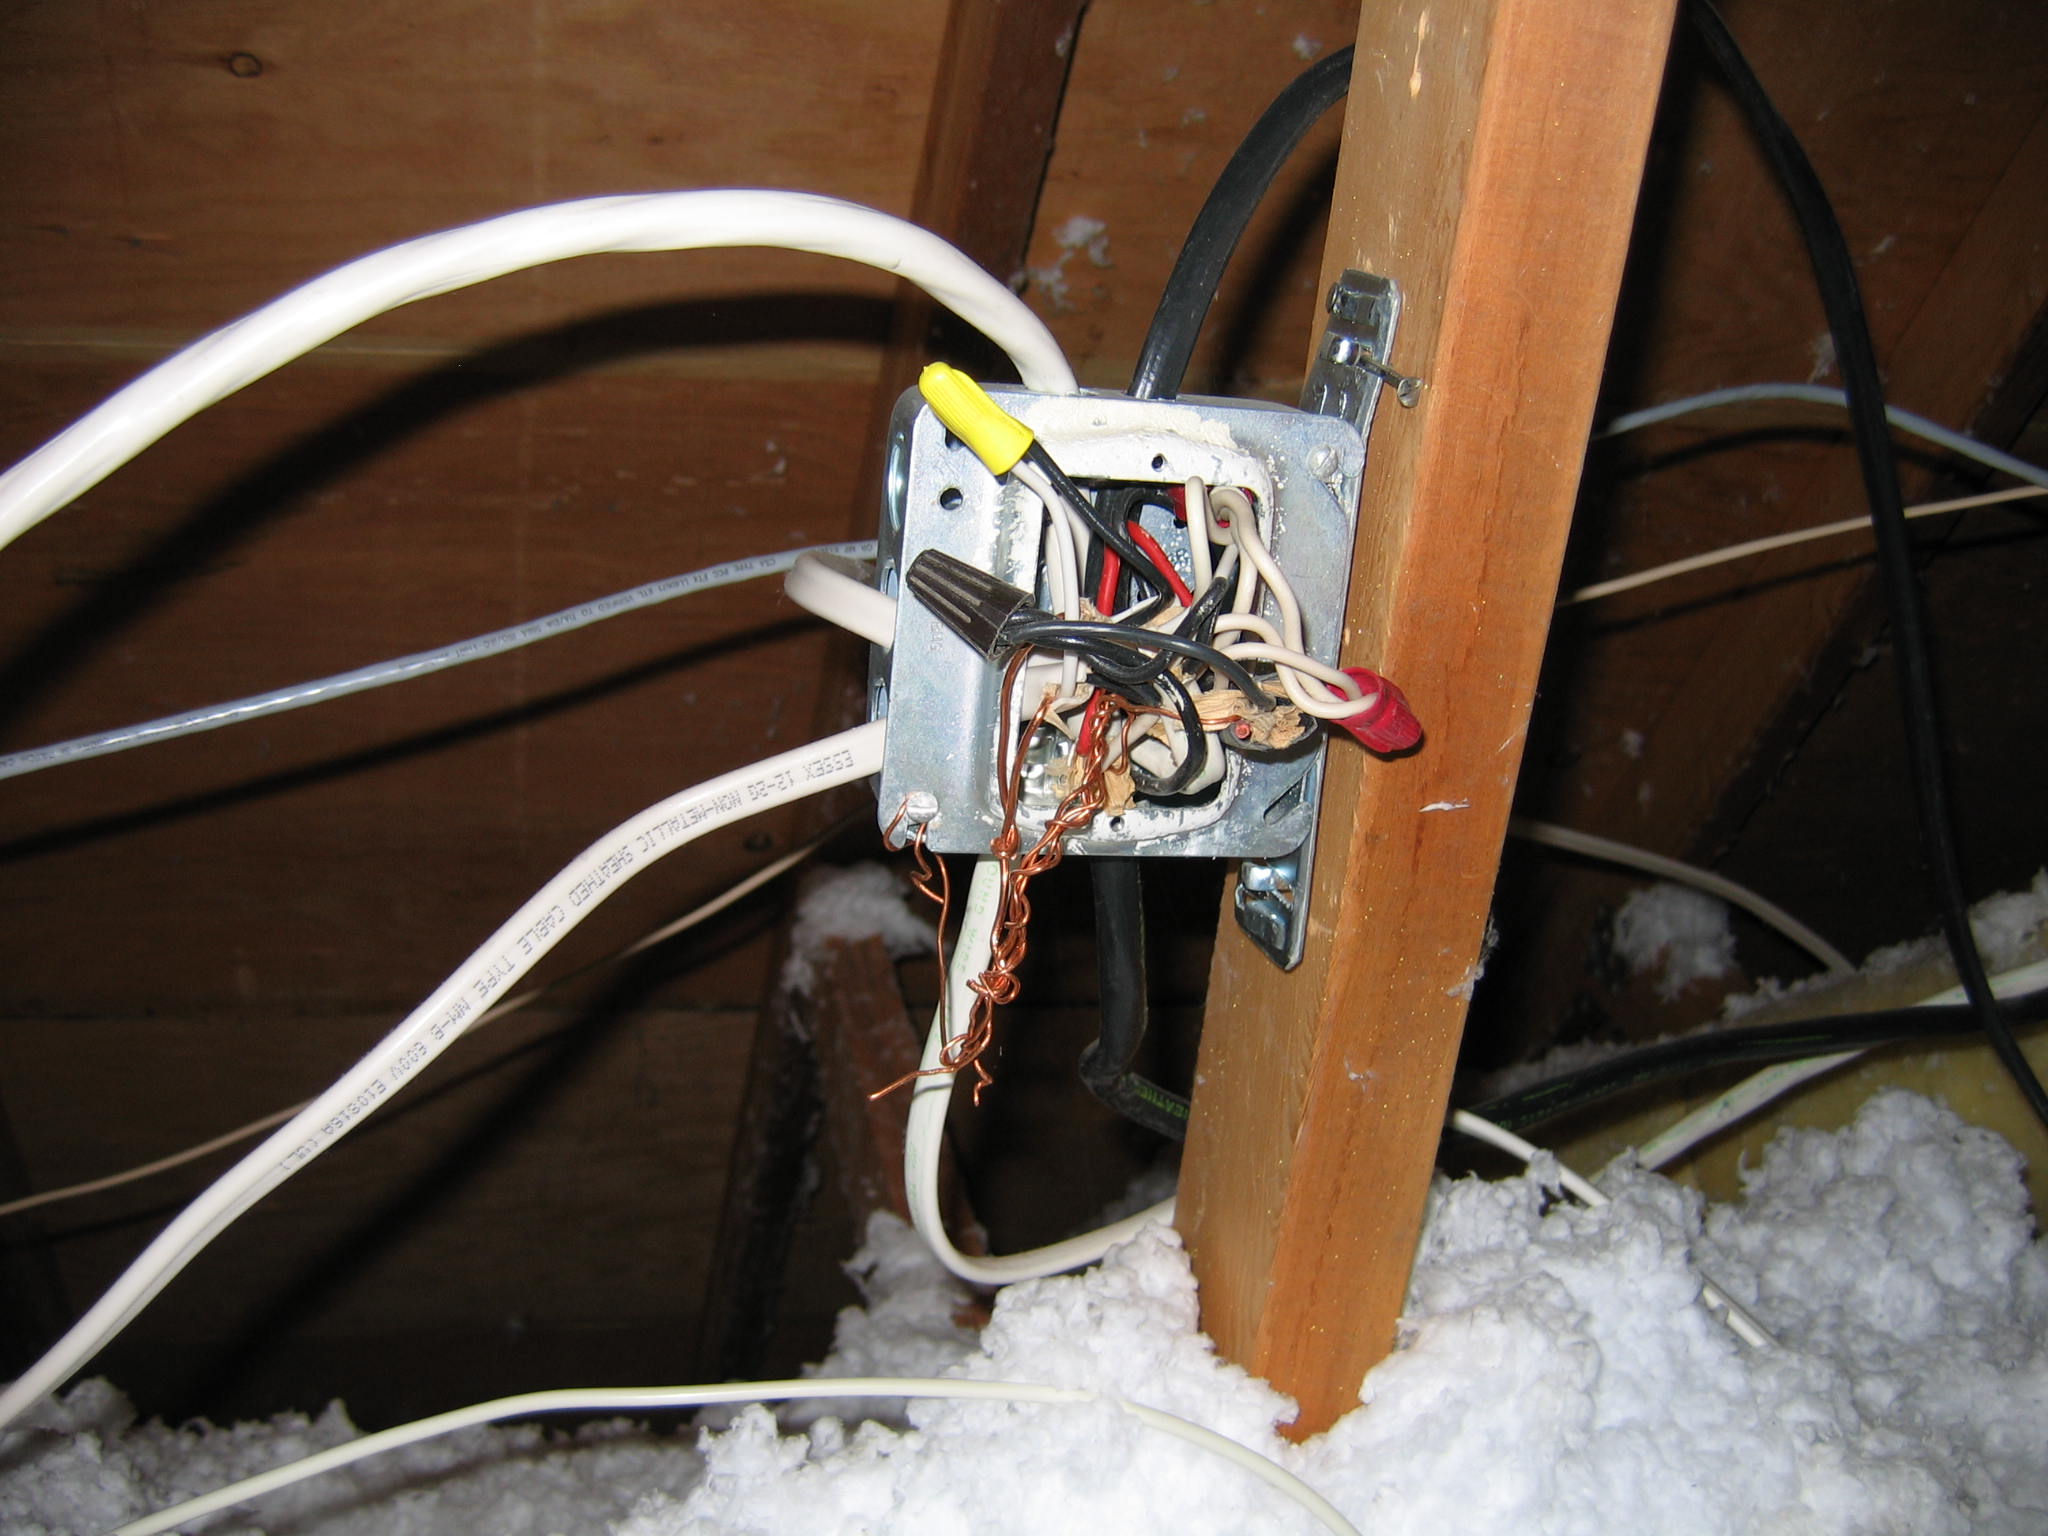 Electricl junction box in attic with exposed wiring not properly closed